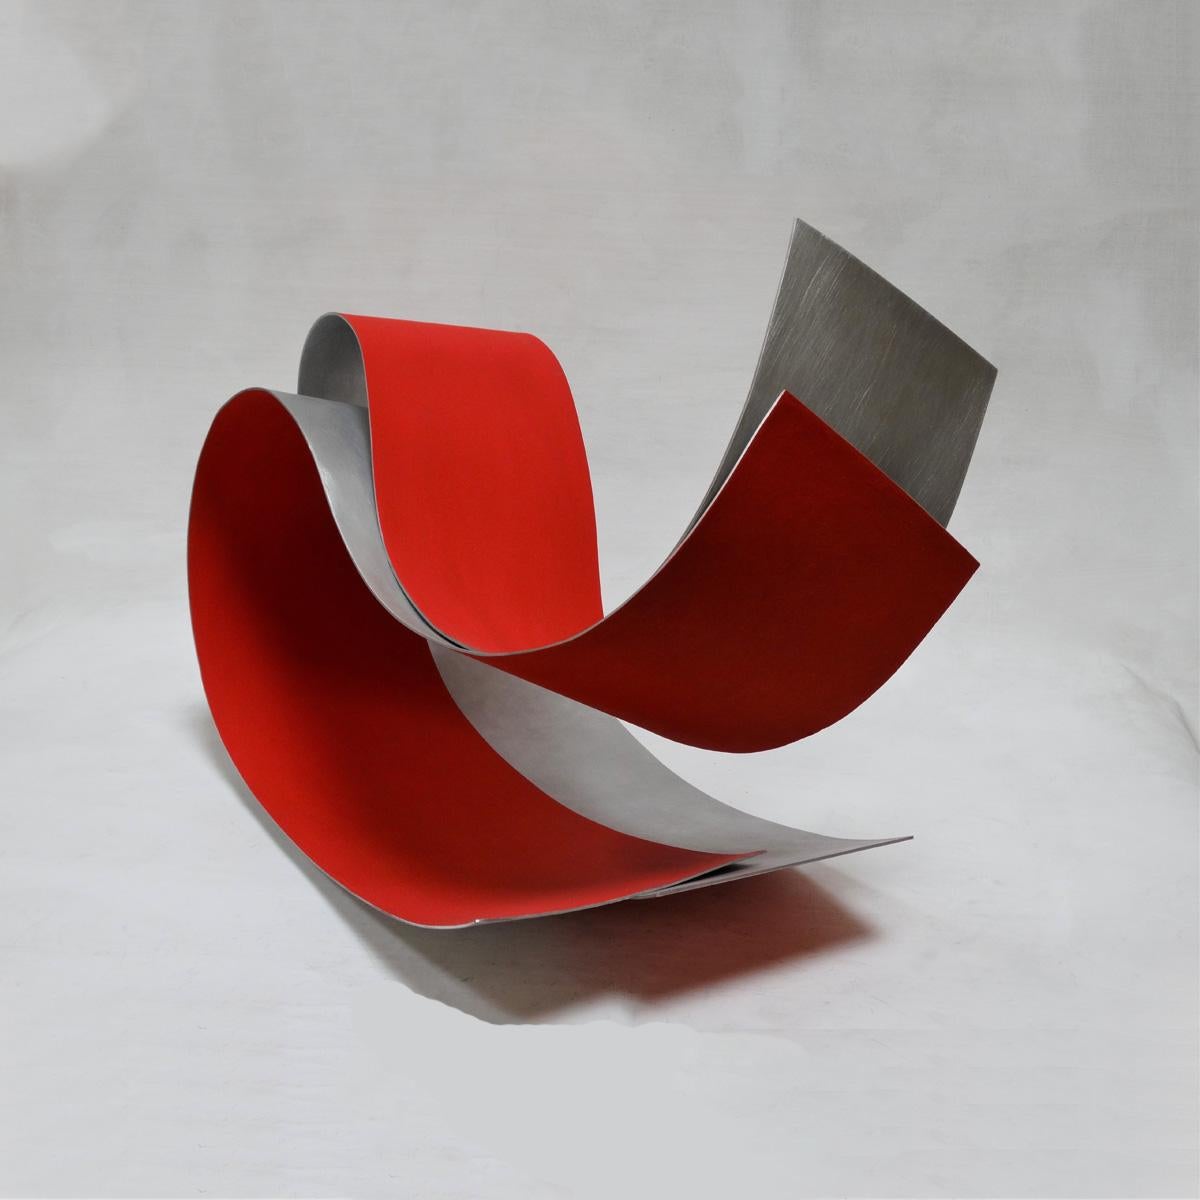 Acull 46 - Abstract, Outdoor Sculpture, Contemporary, Art, Red, Rafael Amorós For Sale 3